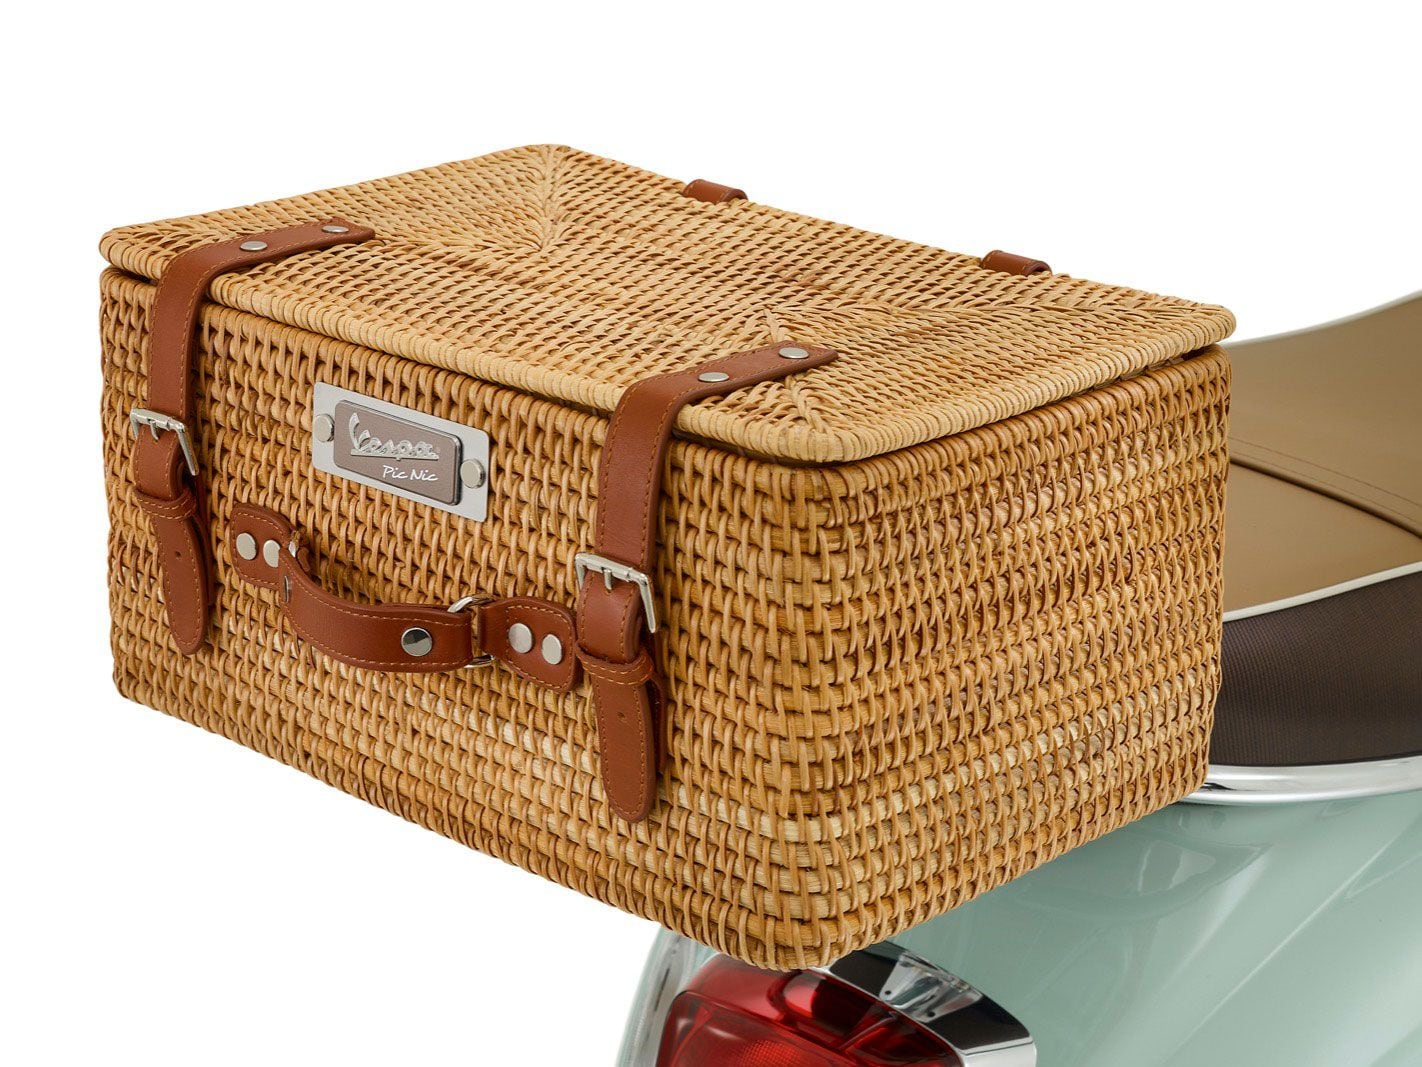 If your invitation says BYOB (Bring Your Own Basket), Pic Nic has you covered with a standard woven picnic basket.